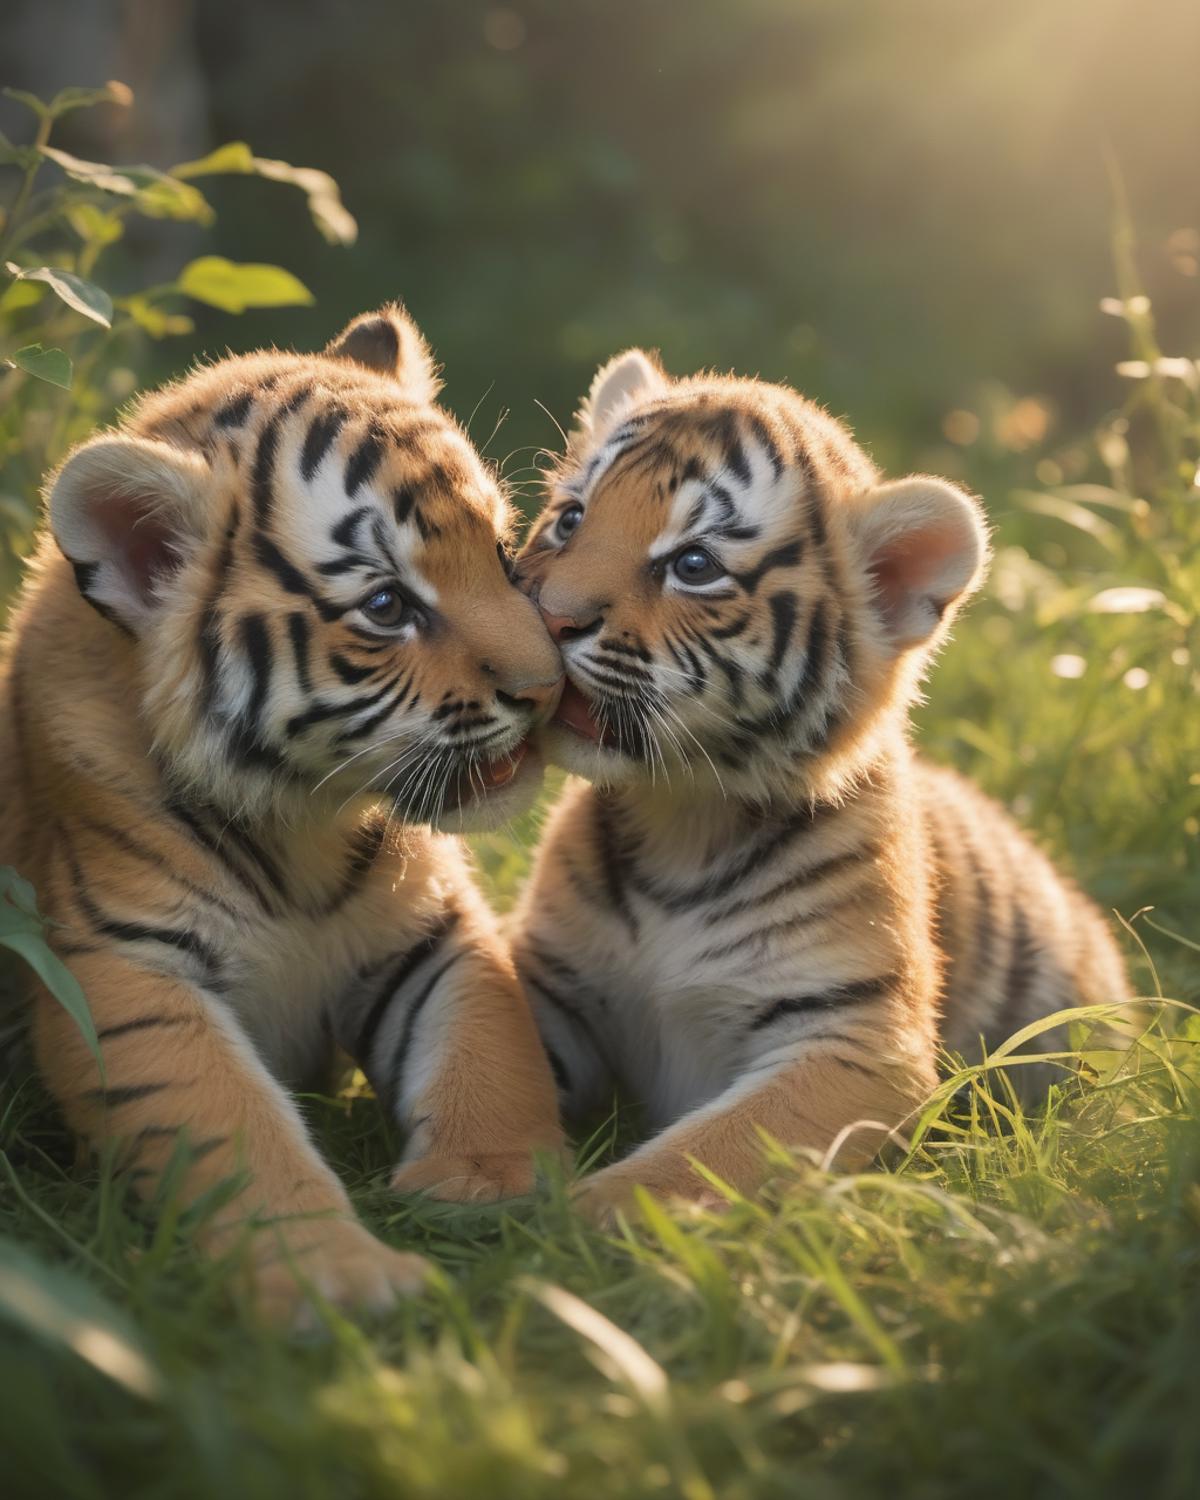 Two young tigers playing and nuzzling each other in a grassy field.